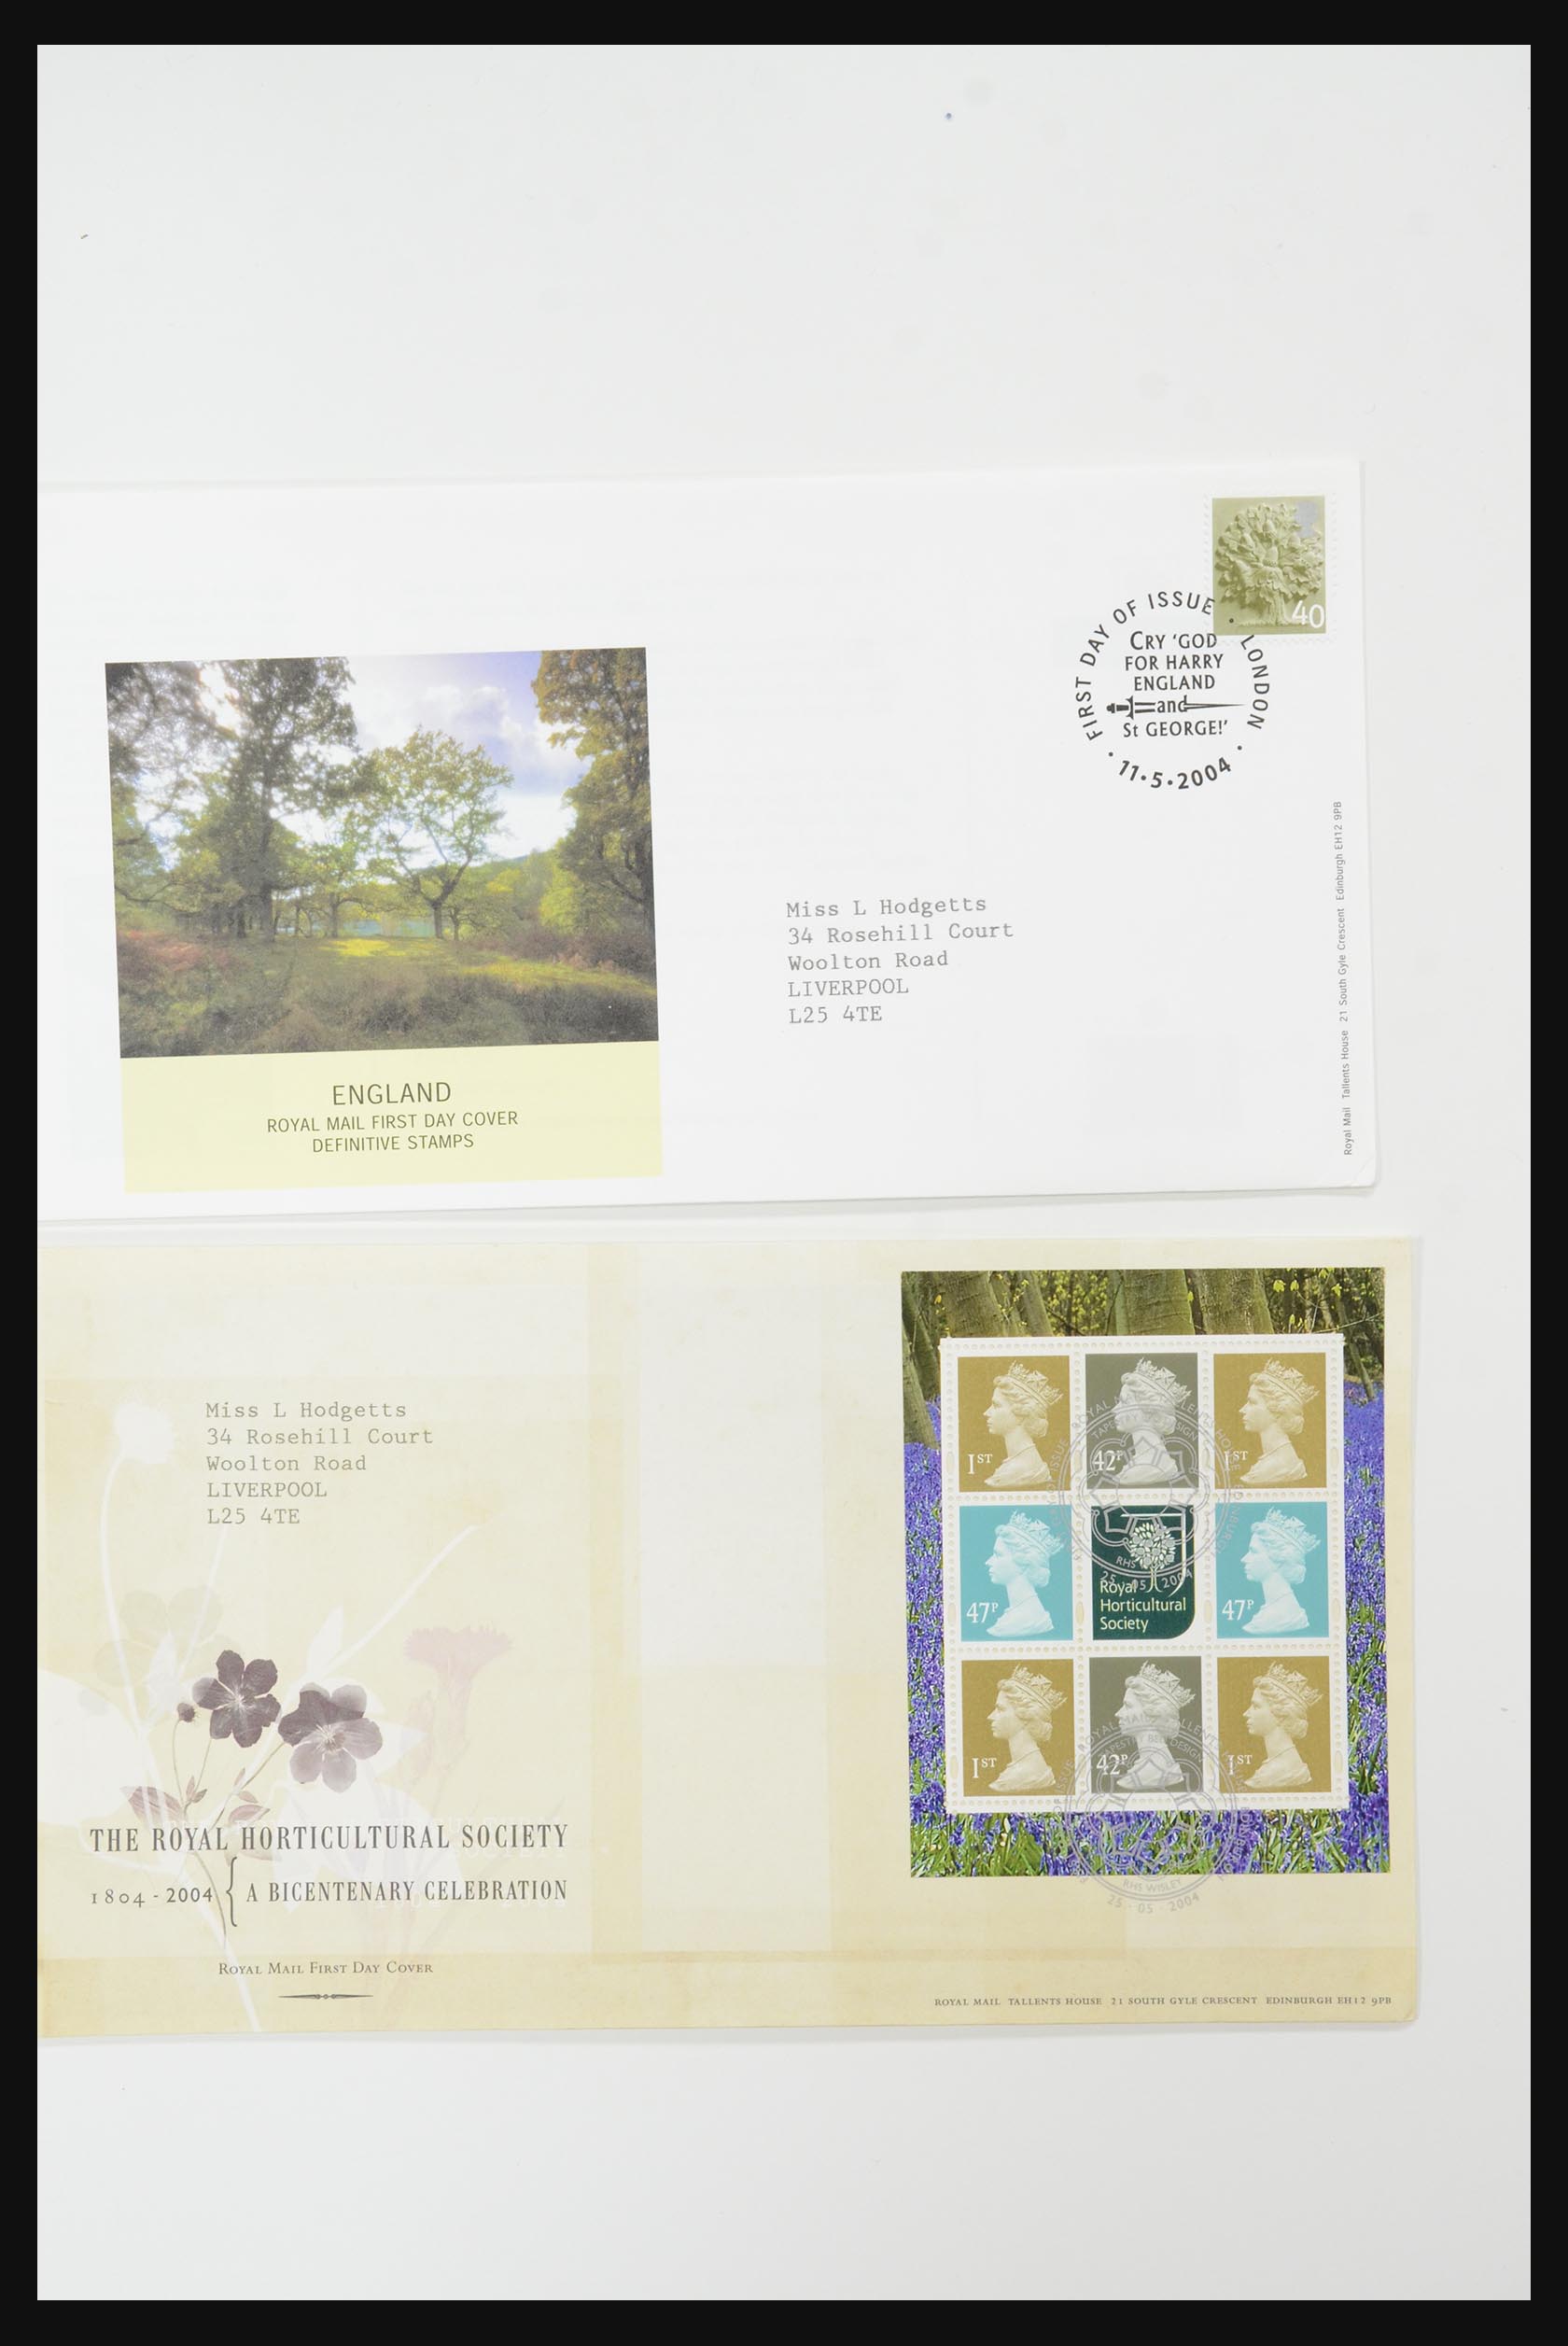 31832 498 - 31832 Great Britain FDC's 1964-2008.